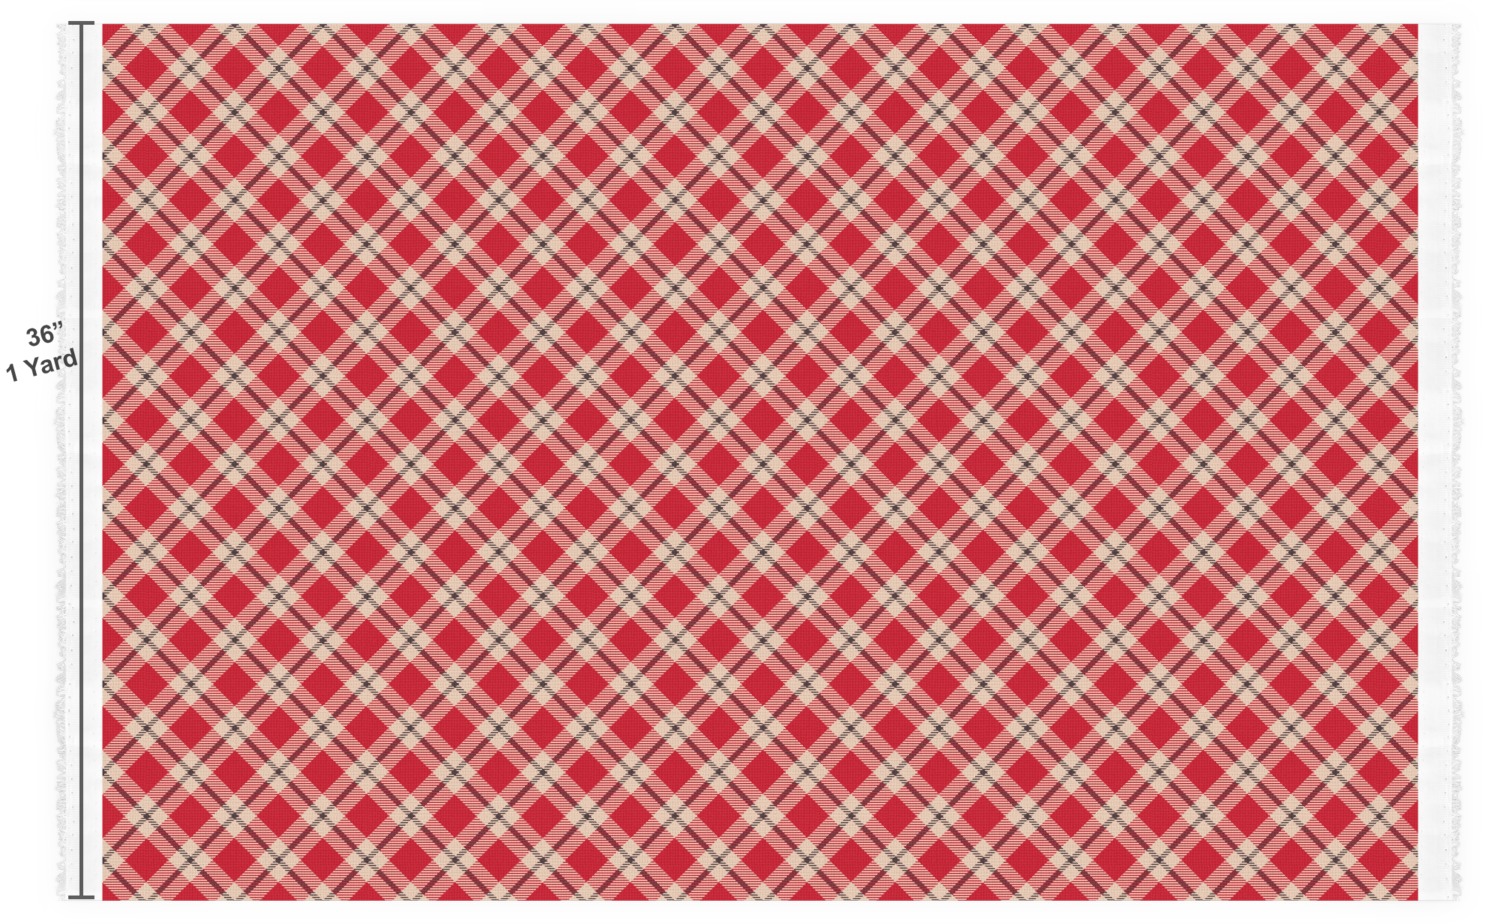 Custom Red & Tan Plaid Fabric by the Yard - PIMA Combed Cotton ...